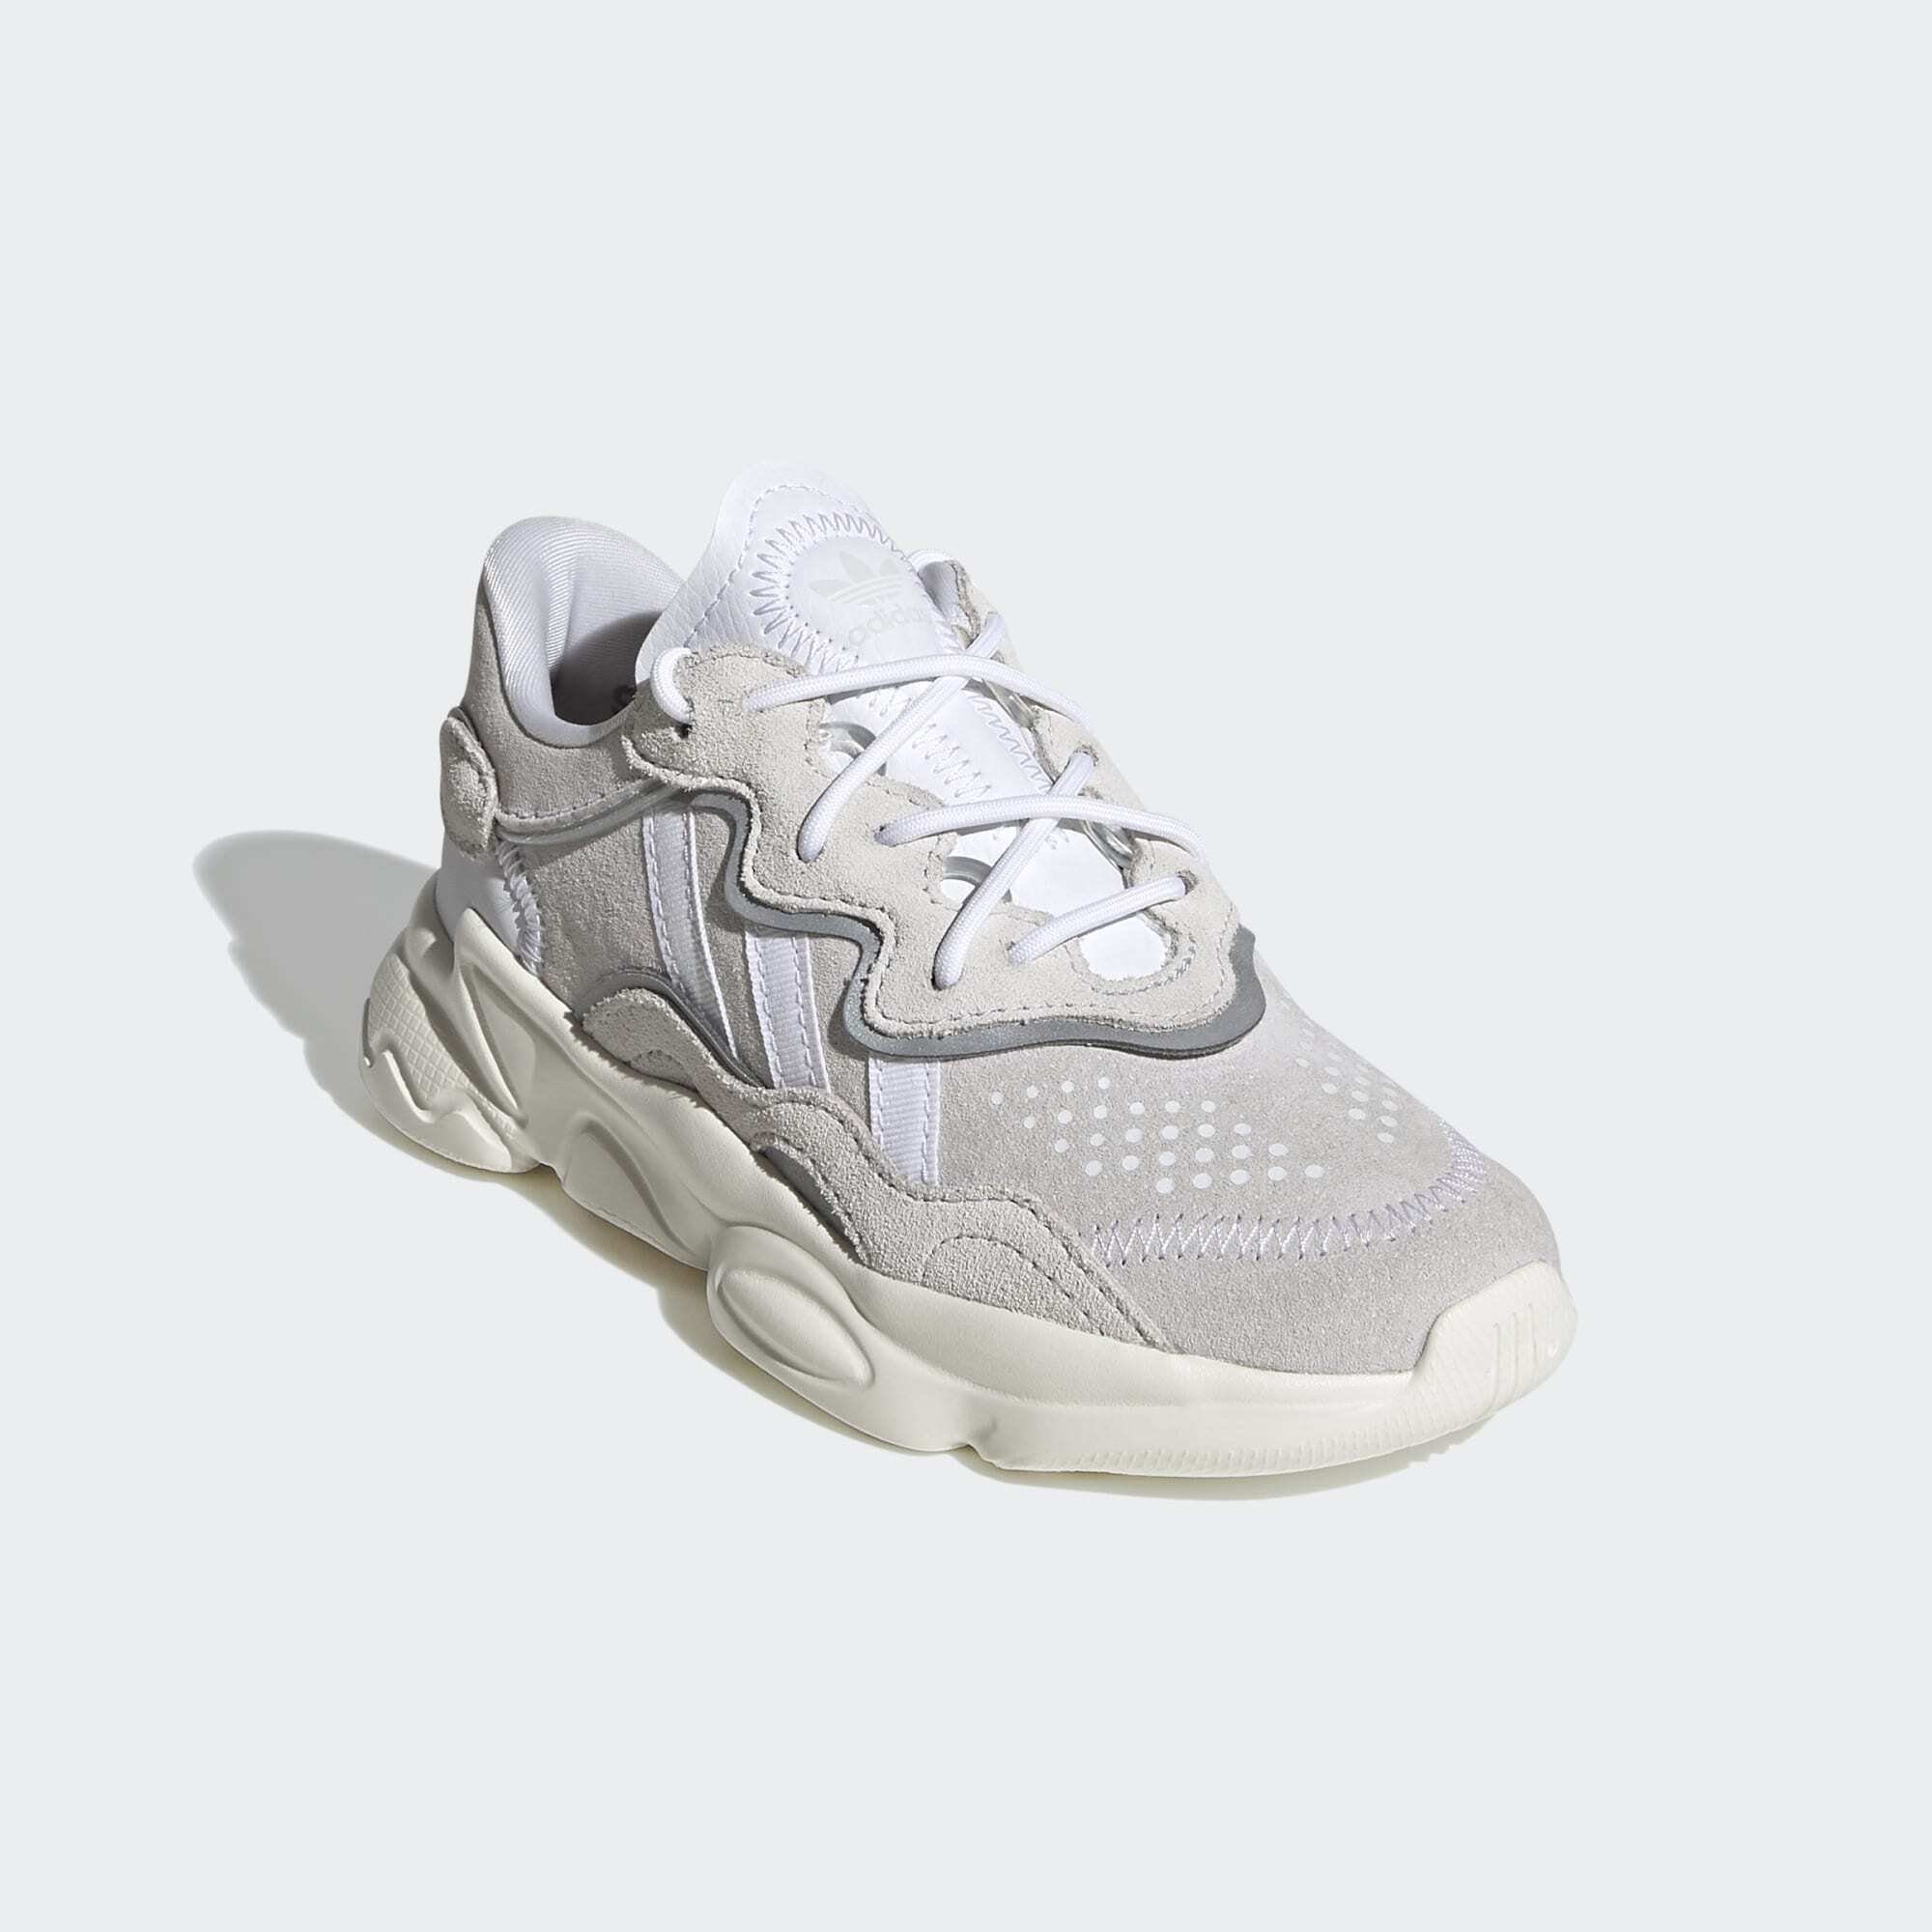 adidas Originals OZWEEGO SCHUH Sneaker Crystal White / Cloud White / Off White | Sneaker